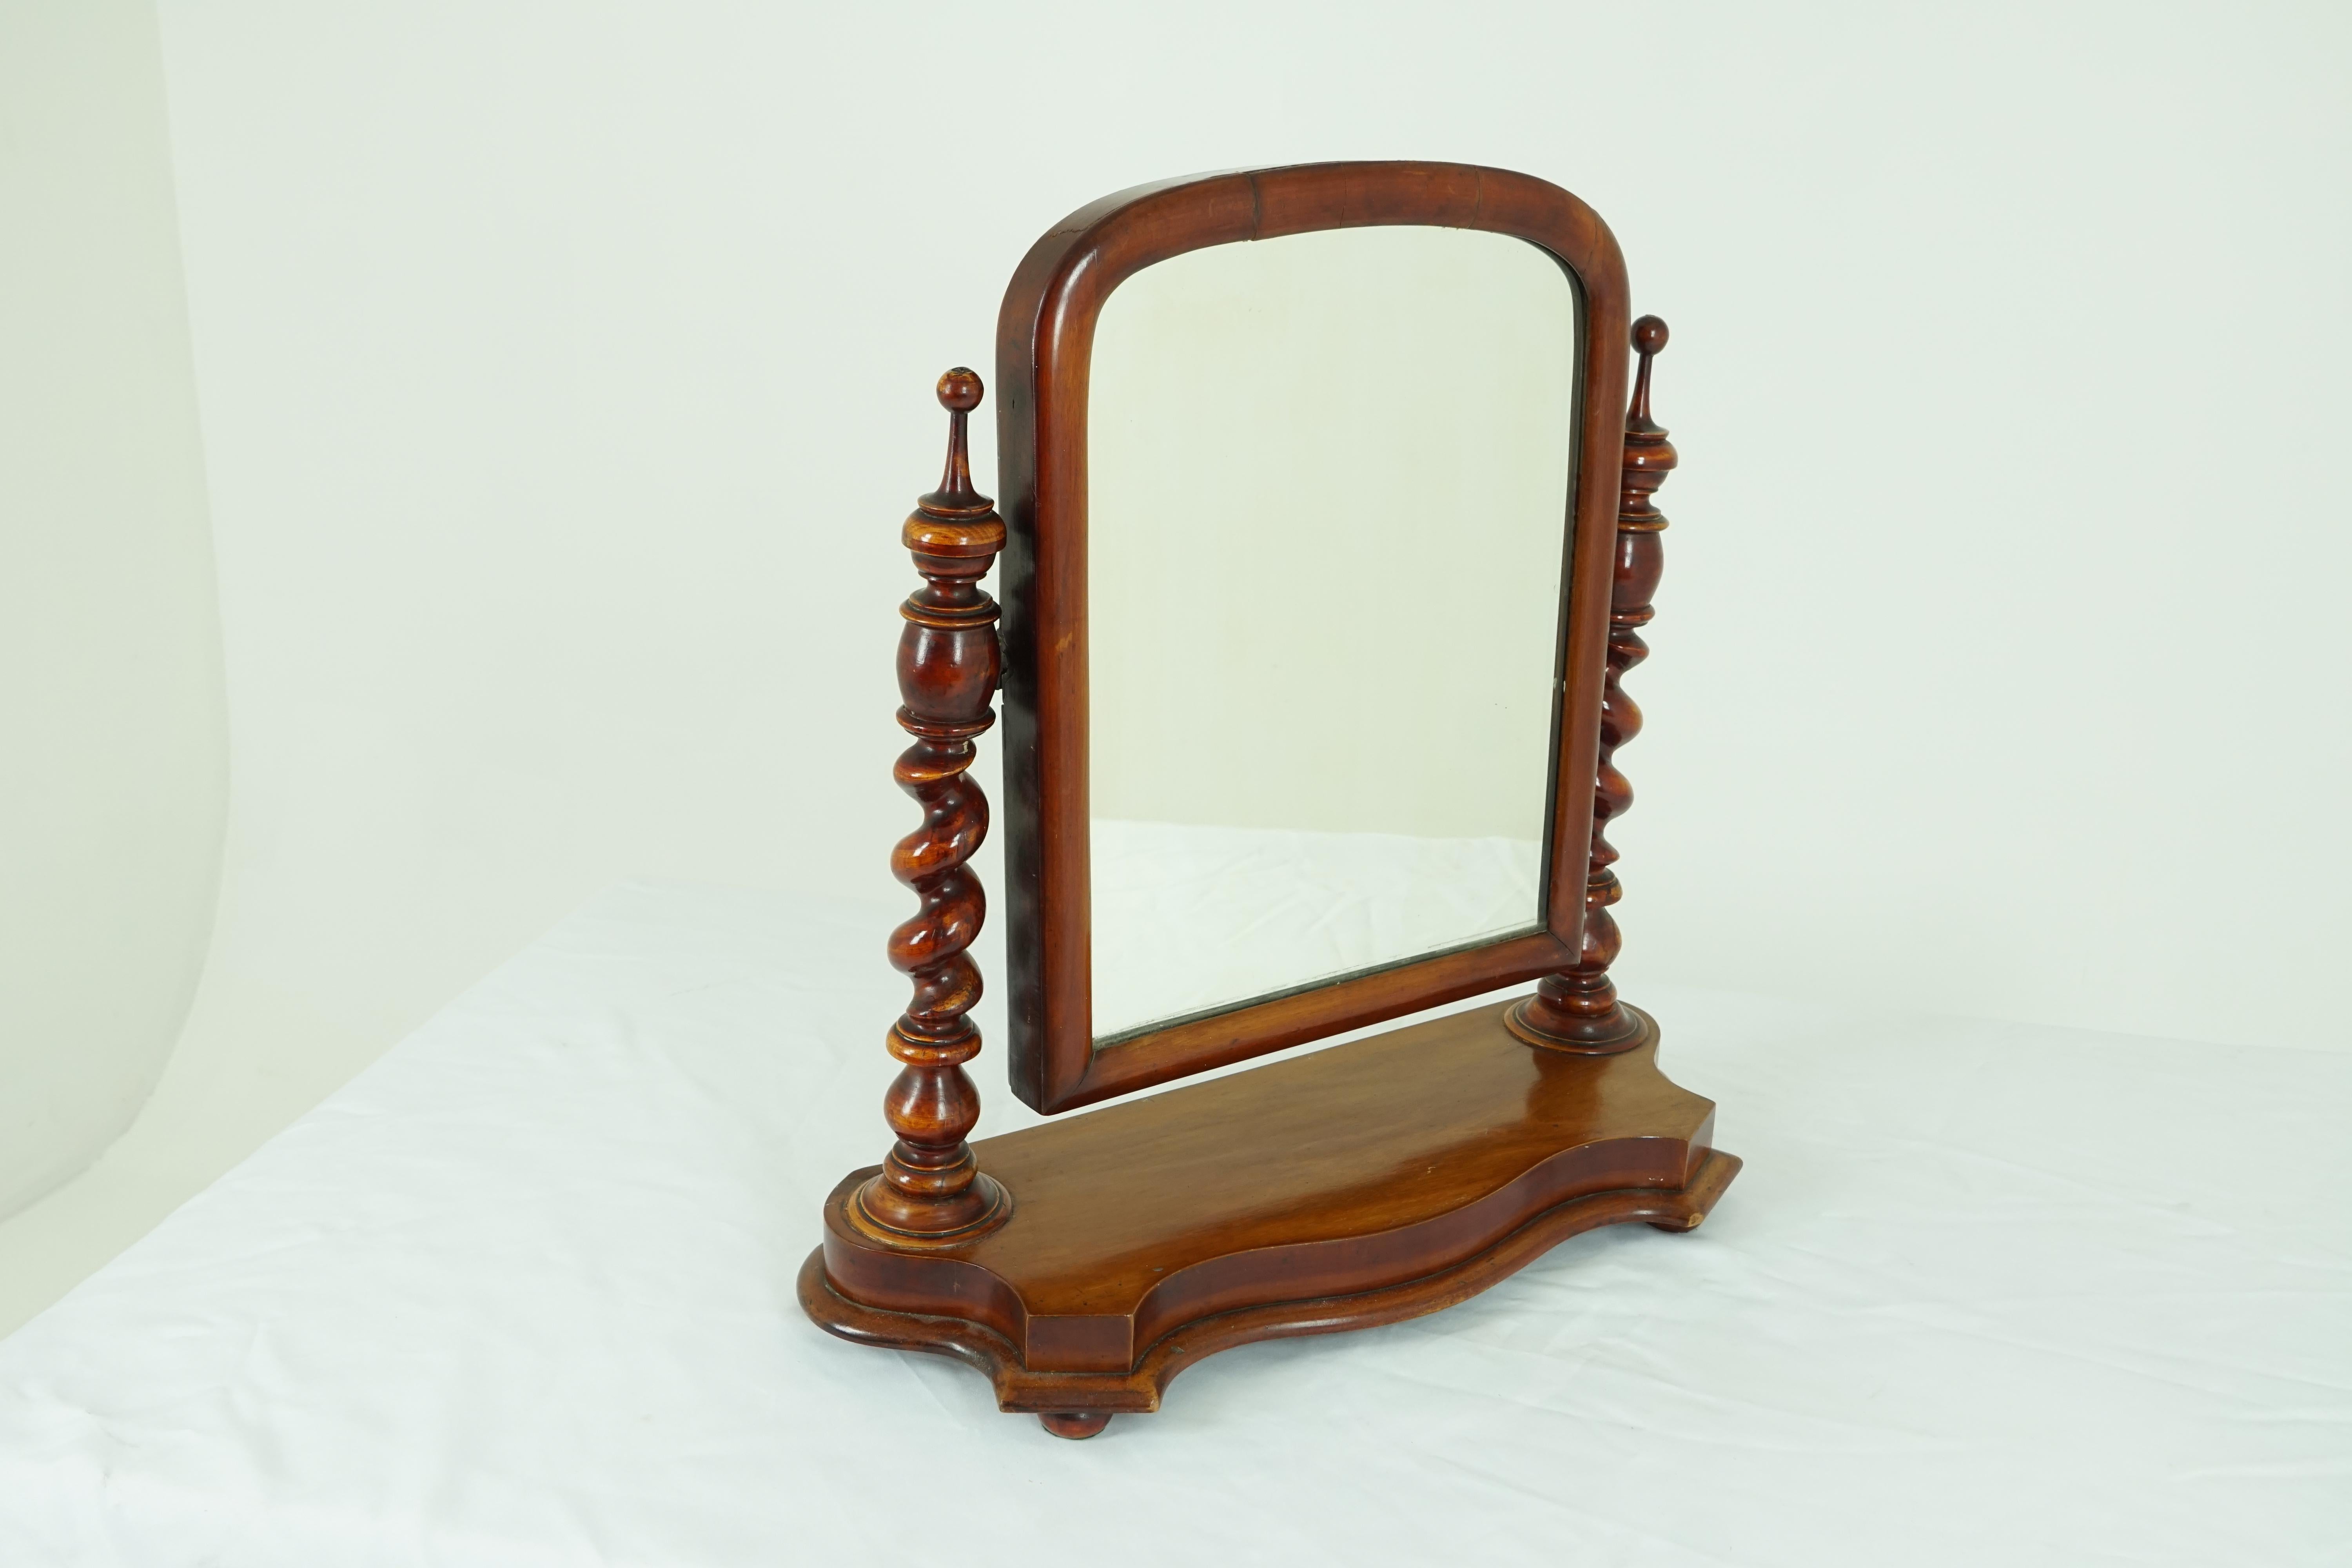 Antique Victorian Barley twist walnut dressing table mirror on stand, Antique Furniture, Scotland, 1880 1731

Scotland 1880
Solid walnut
Original domed top mirror supported by a pair of barley twist supports
Set on a serpentine shaped base and